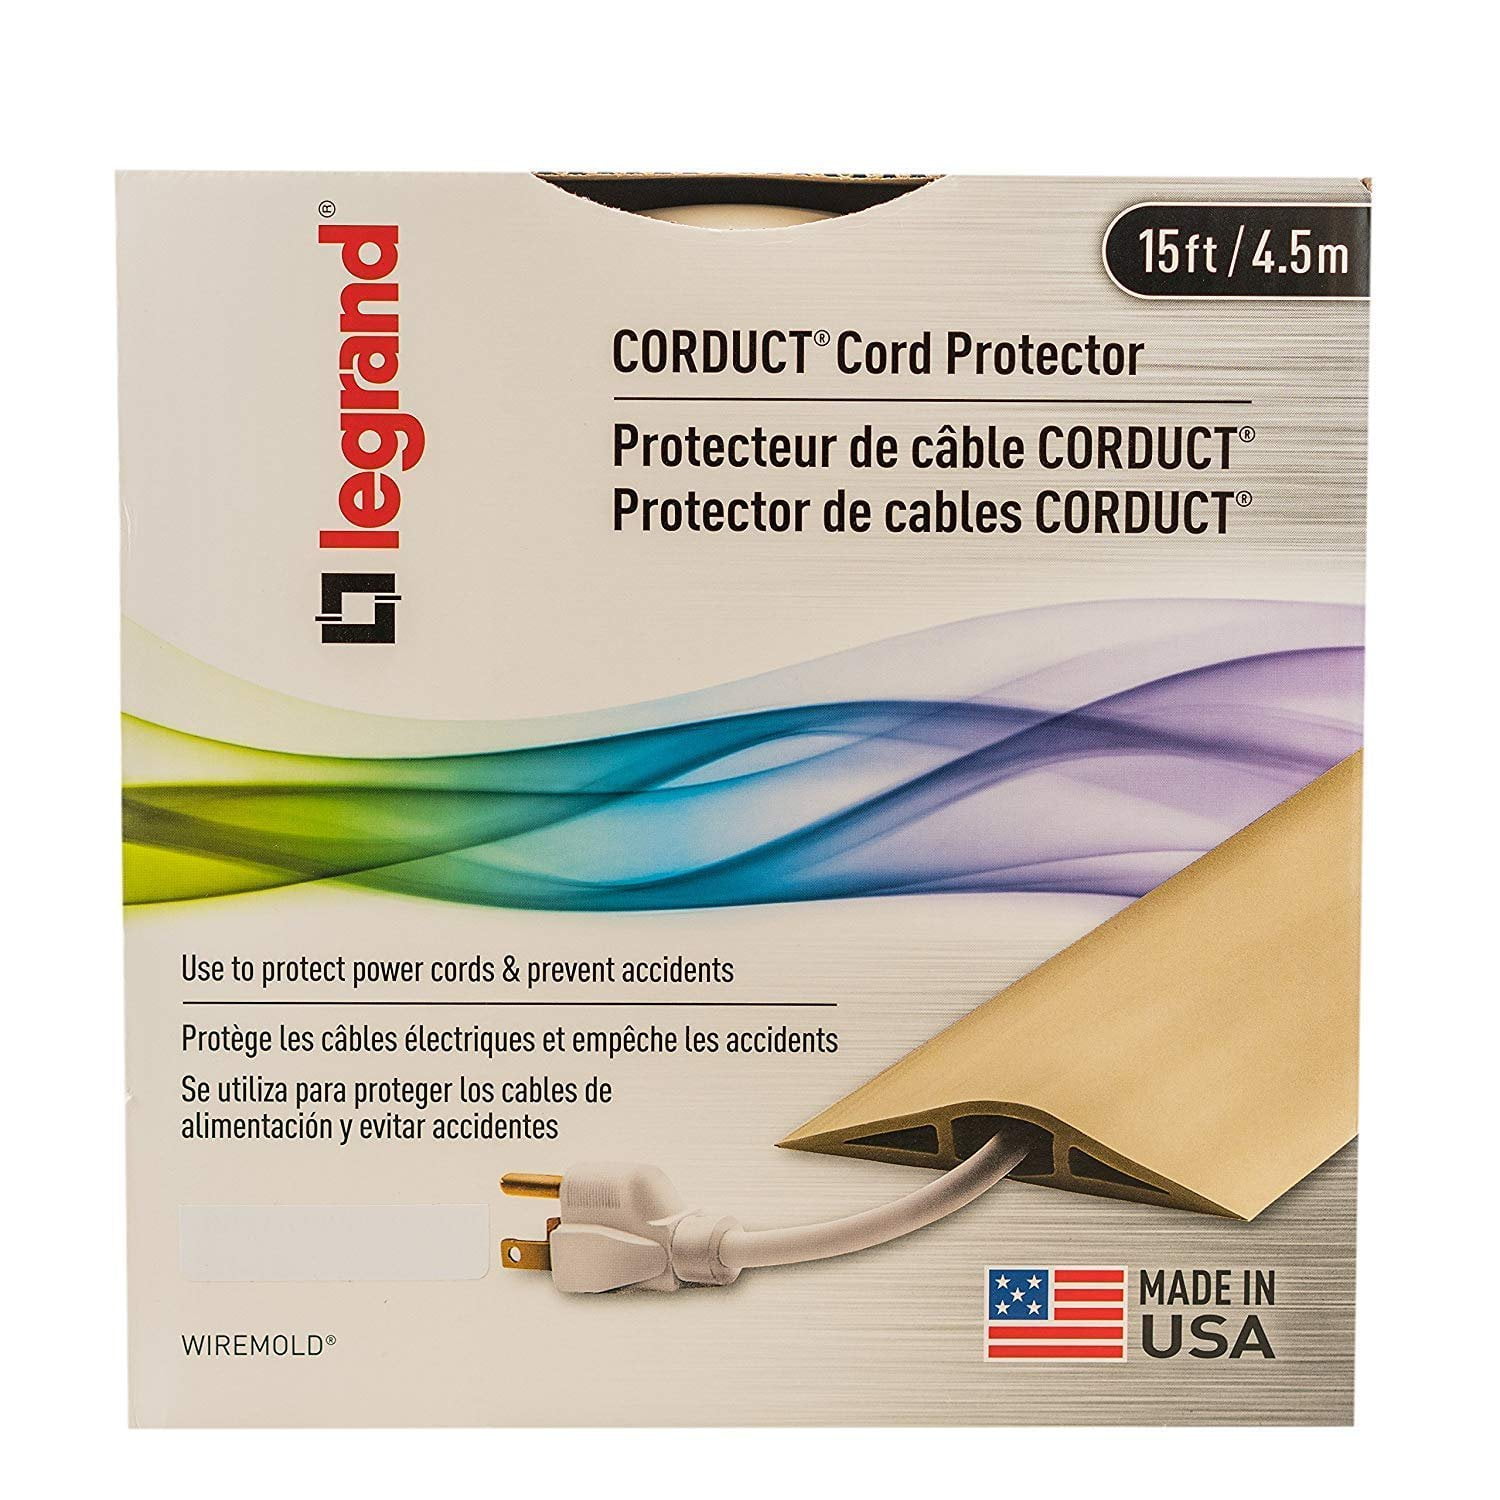 Wiremold: How to Install Corduct Overfloor Cord Protector 